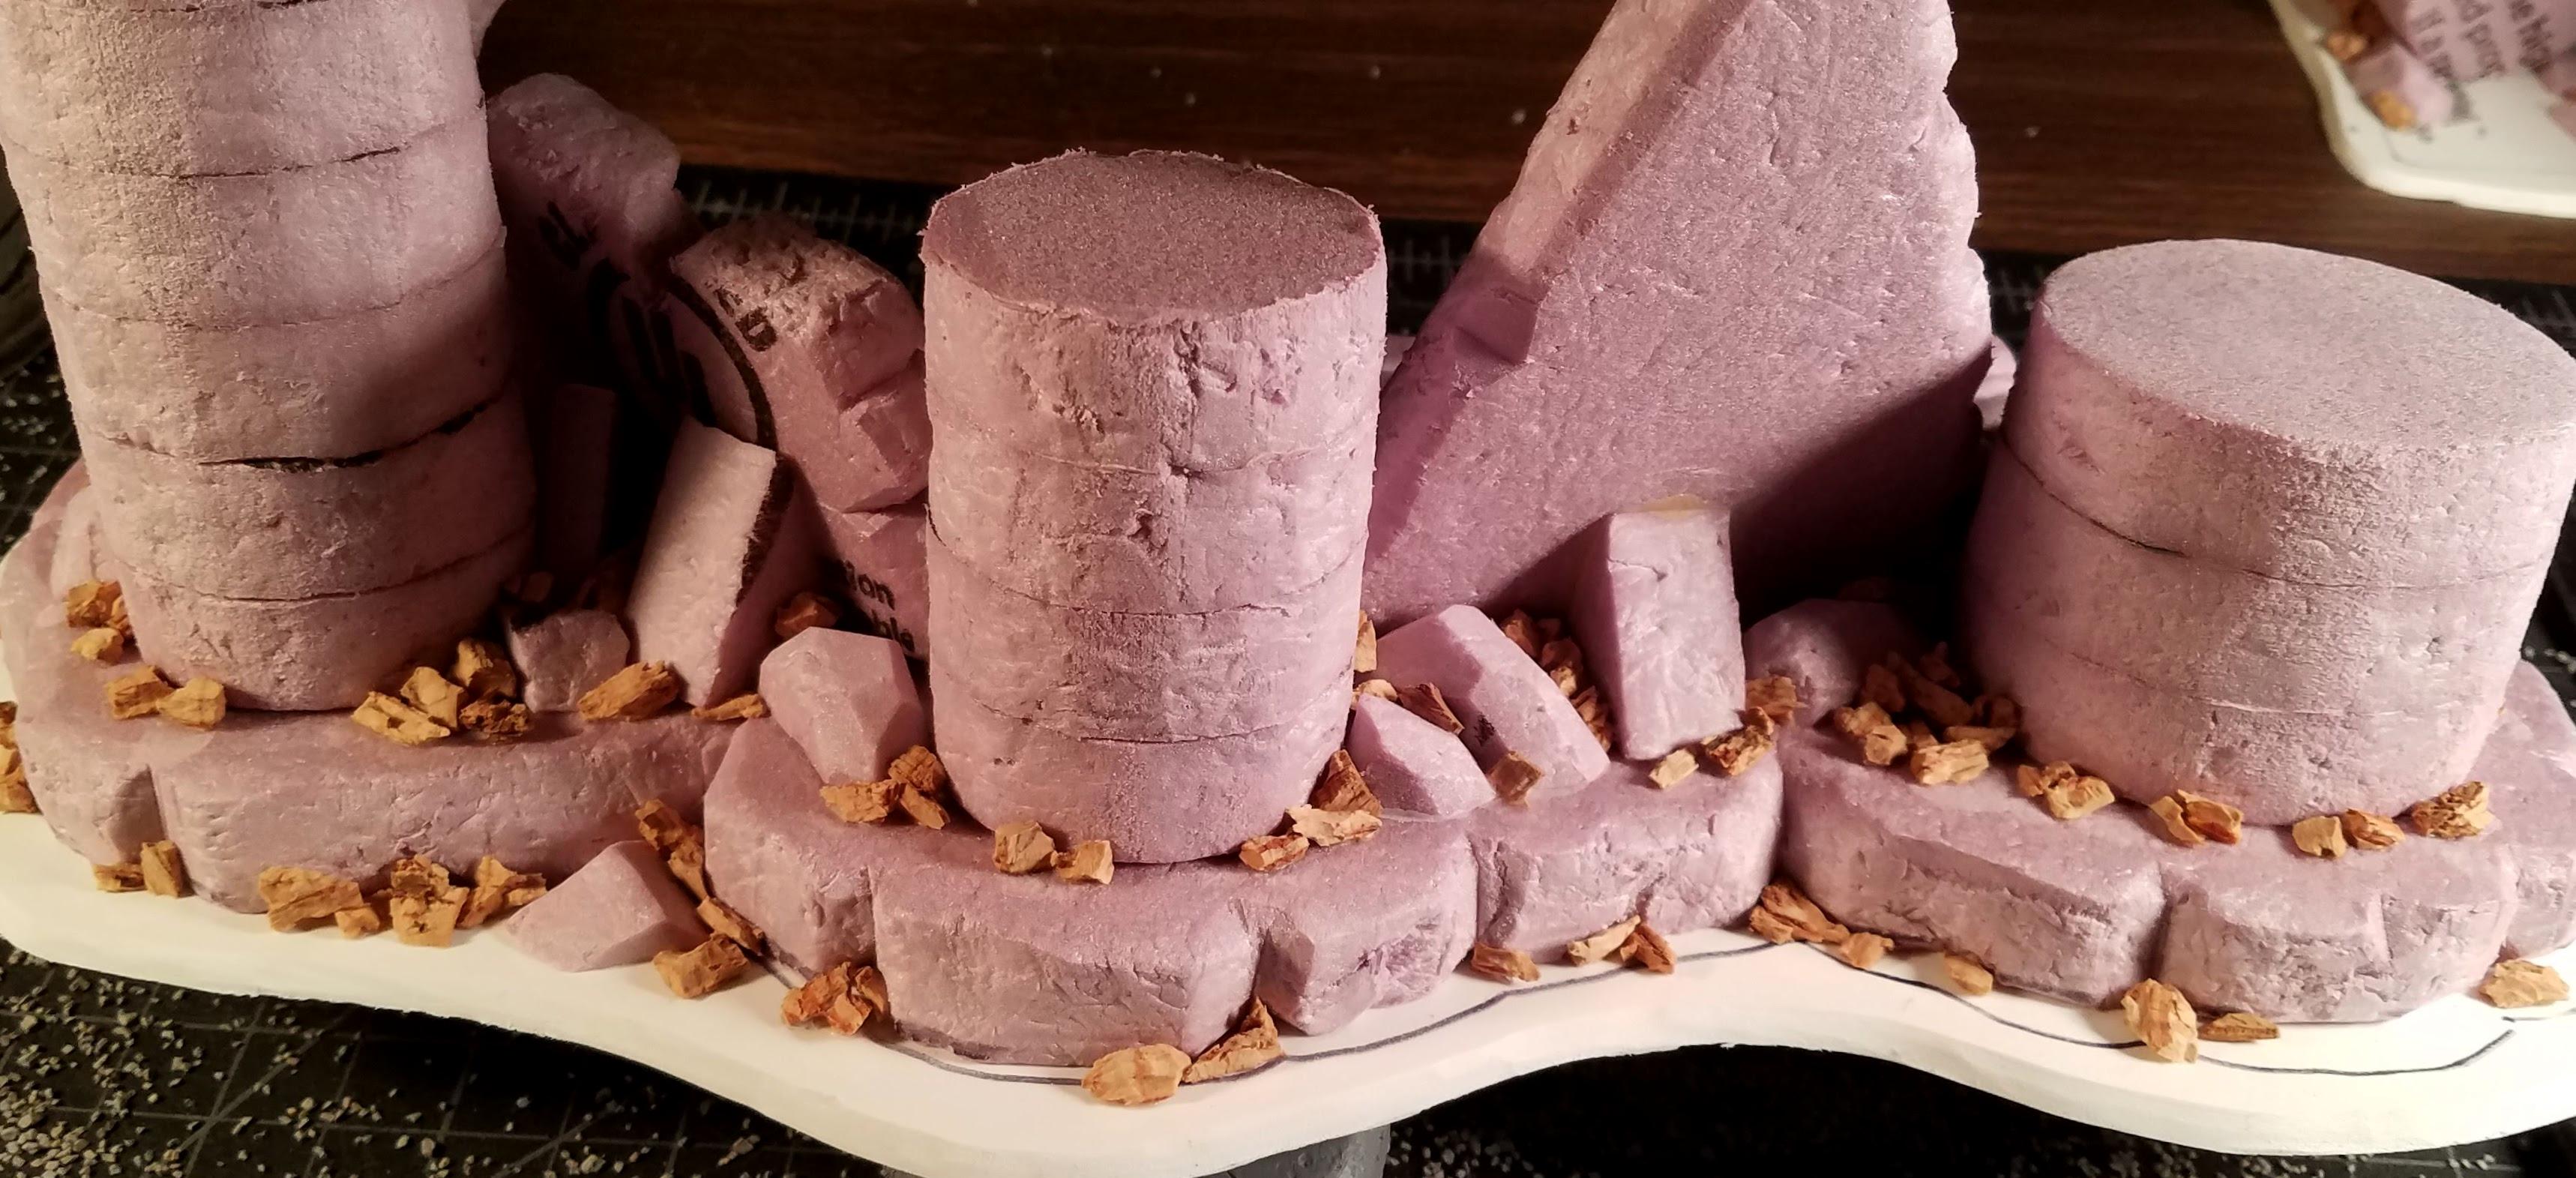 First big chunks of pink foam, then smaller bits of cork..